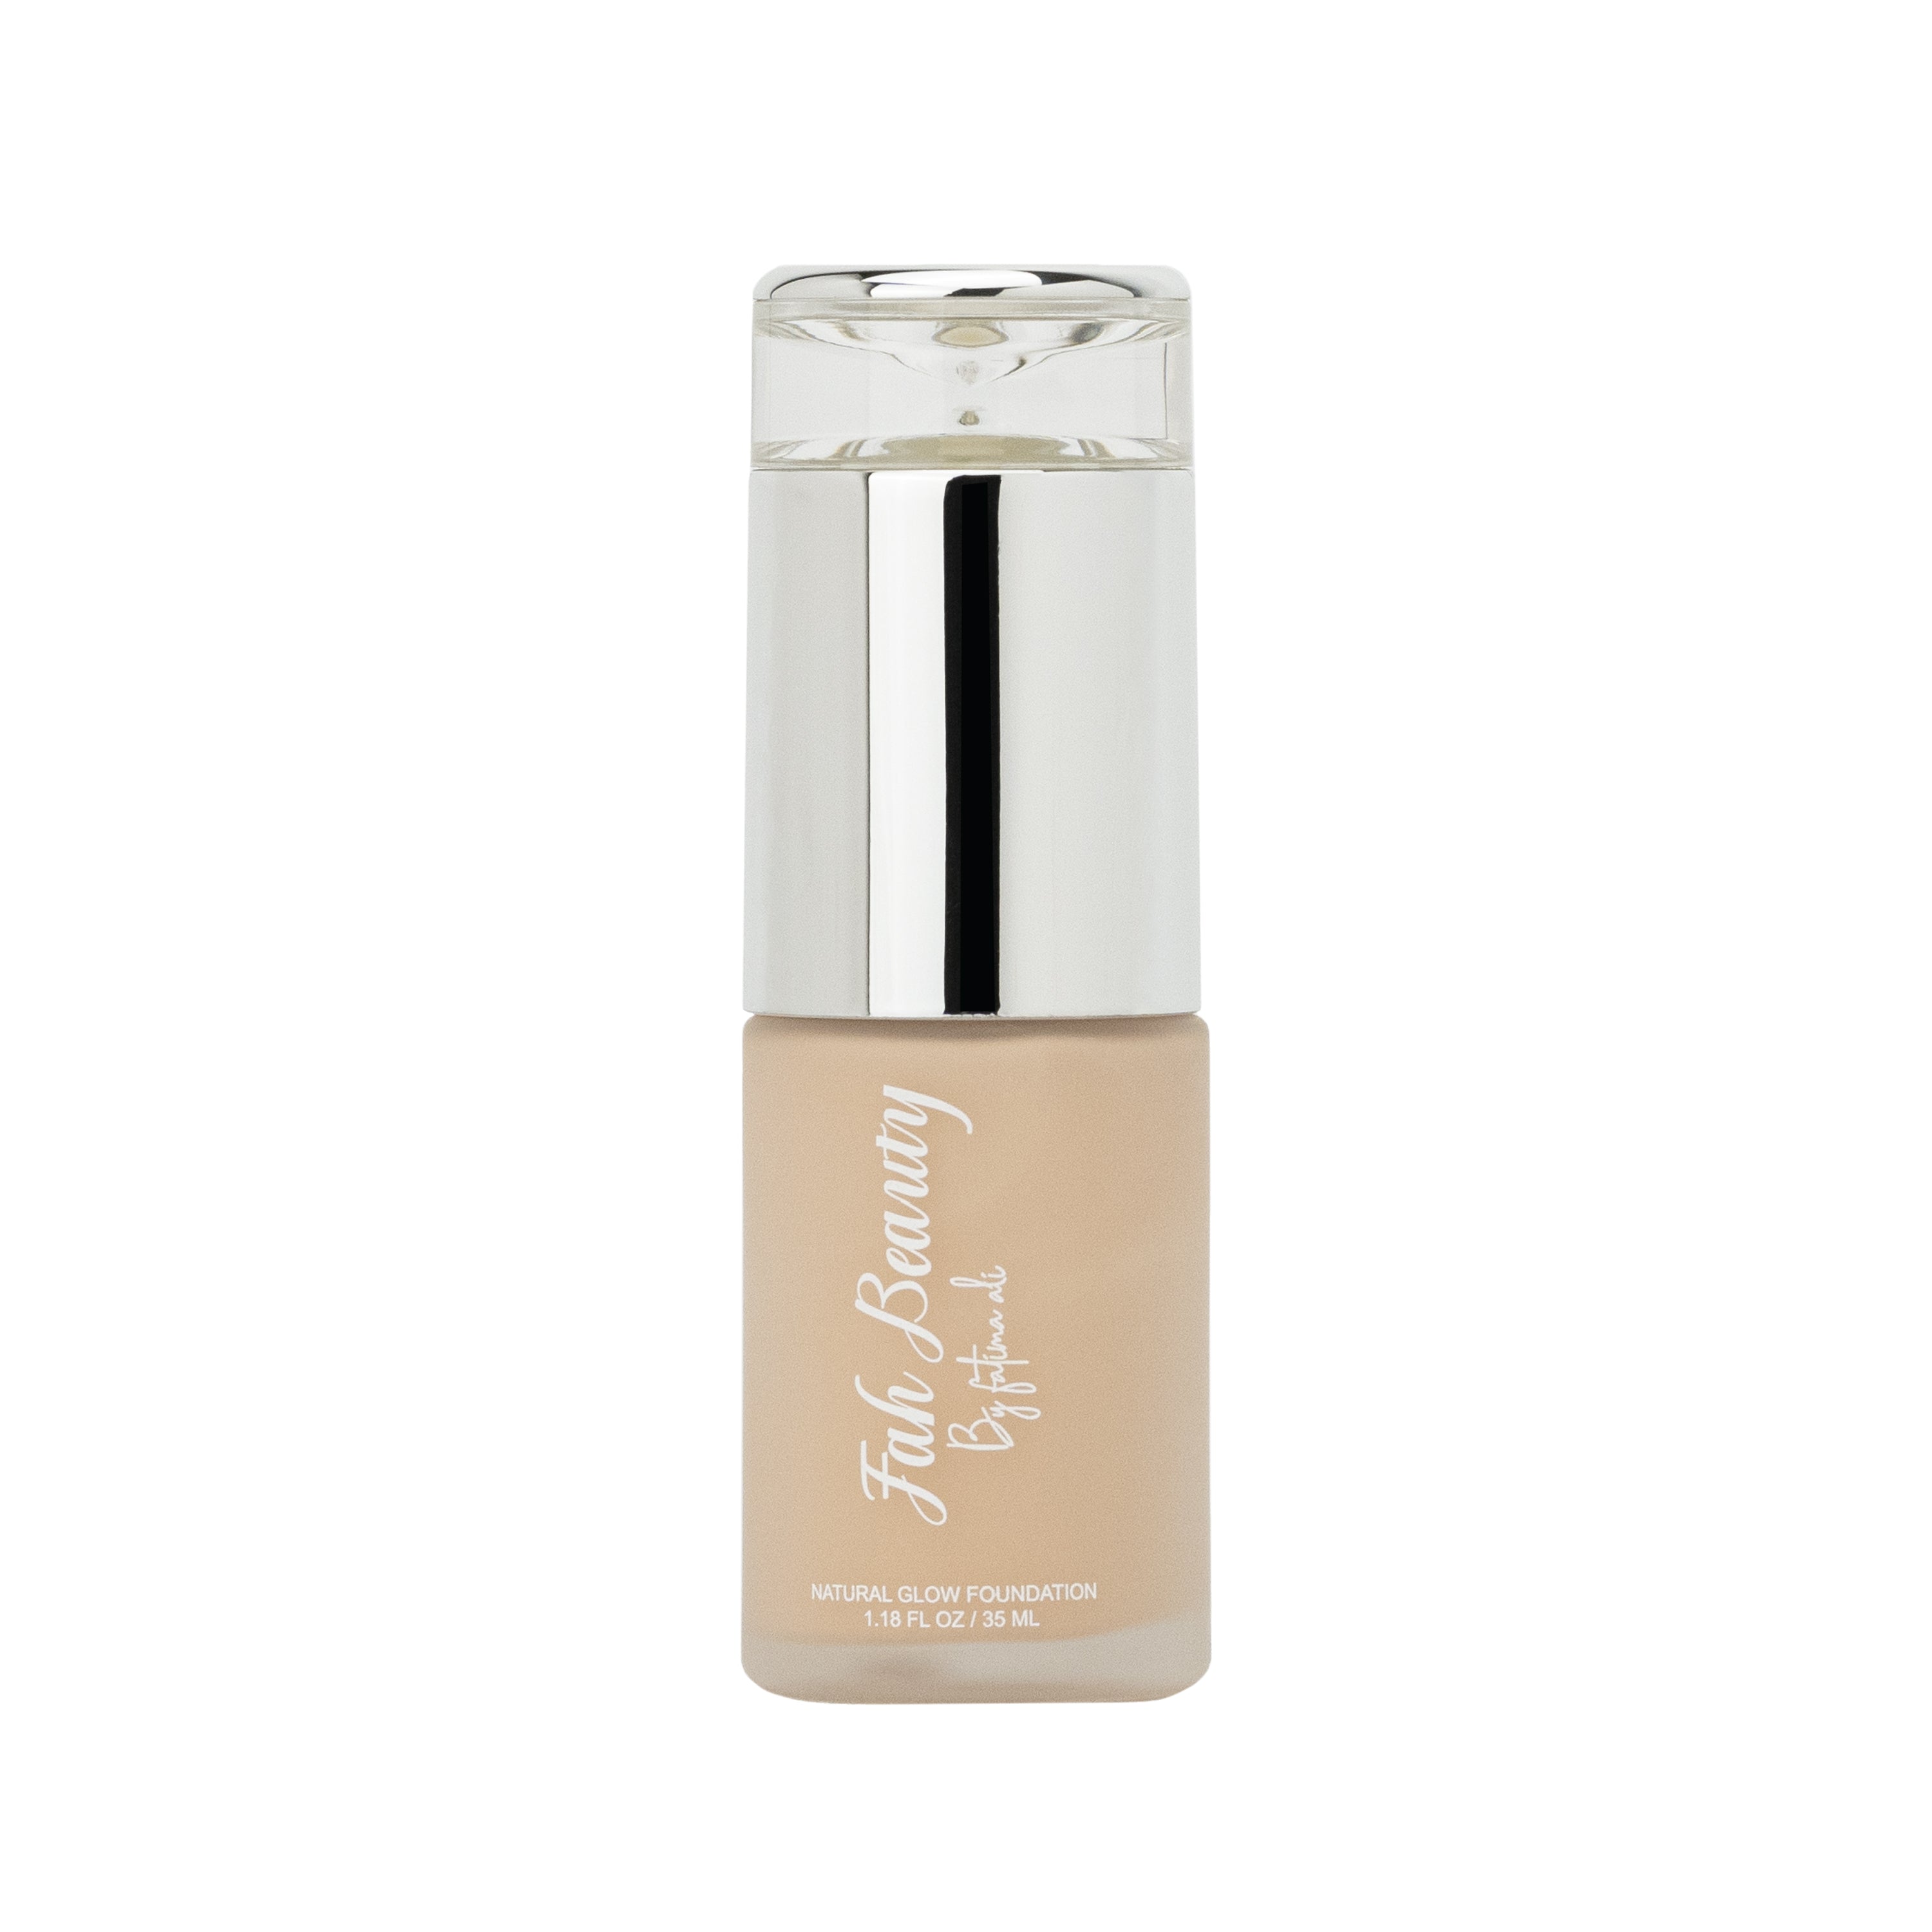 Natural Glow Foundation Deal